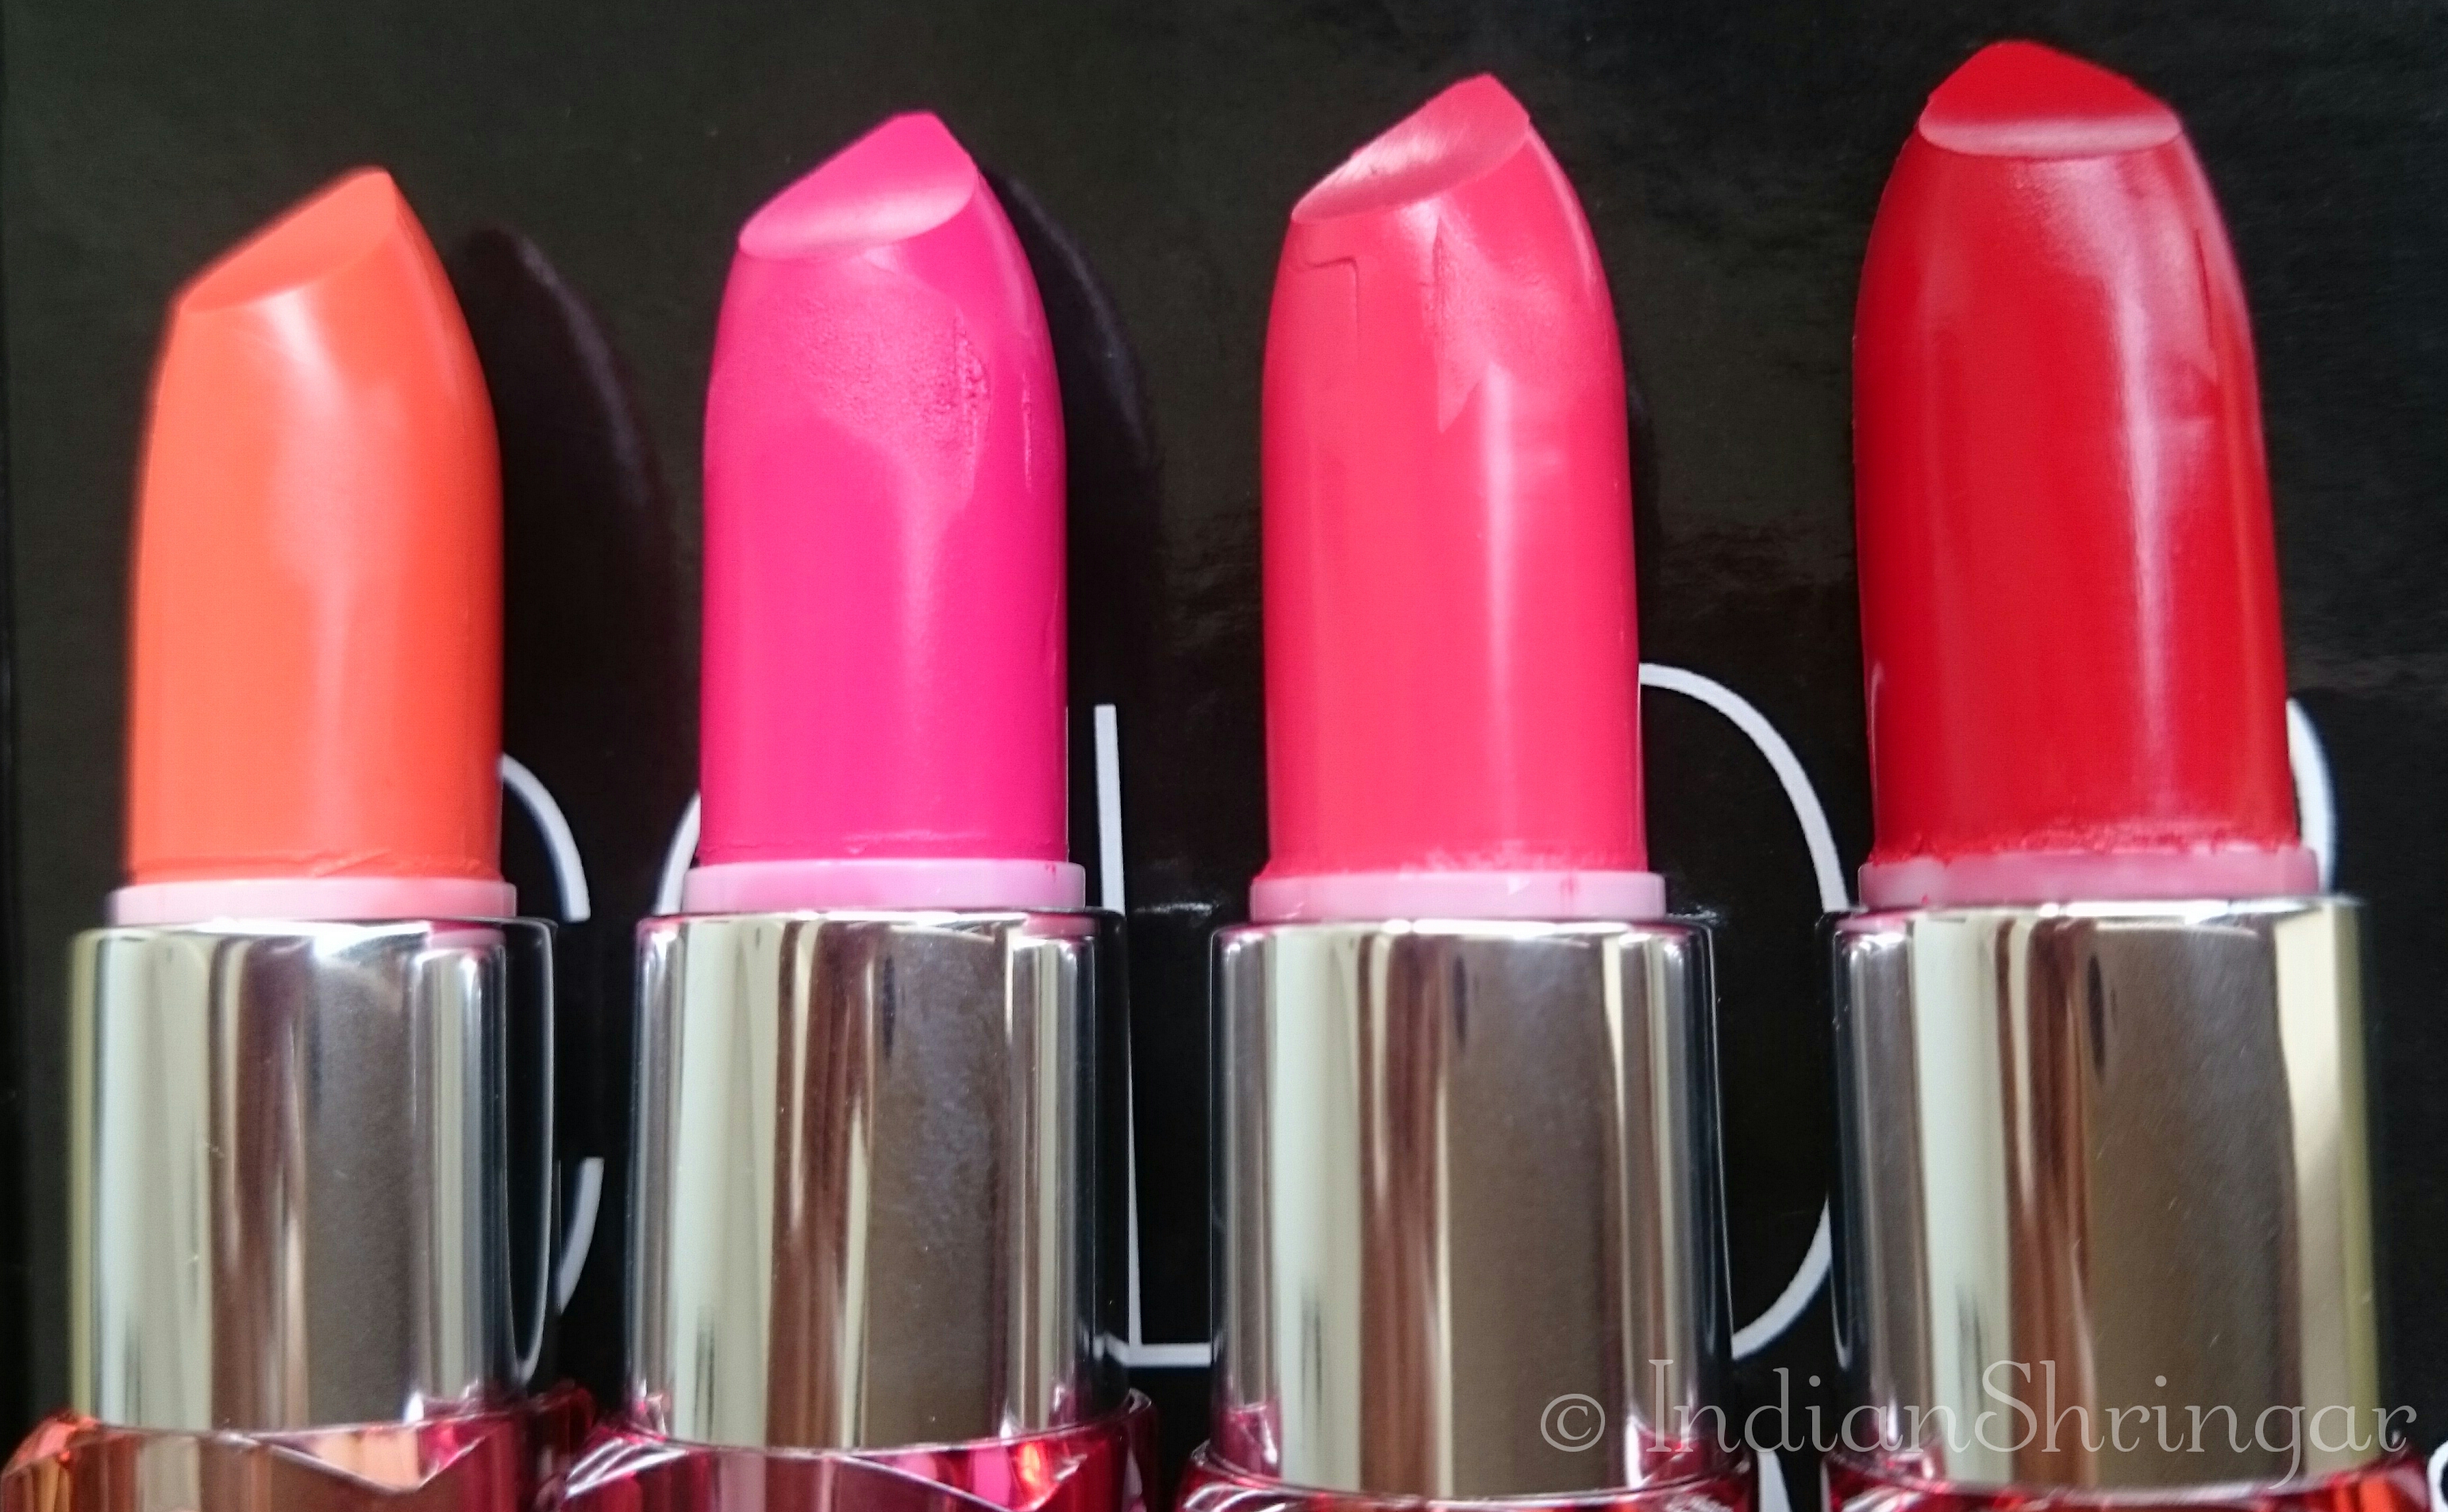 Maybelline Color Show lipsticks in Orange Icon, Fuschia Flare, Cherry Crush and Red Rush - review and swatches